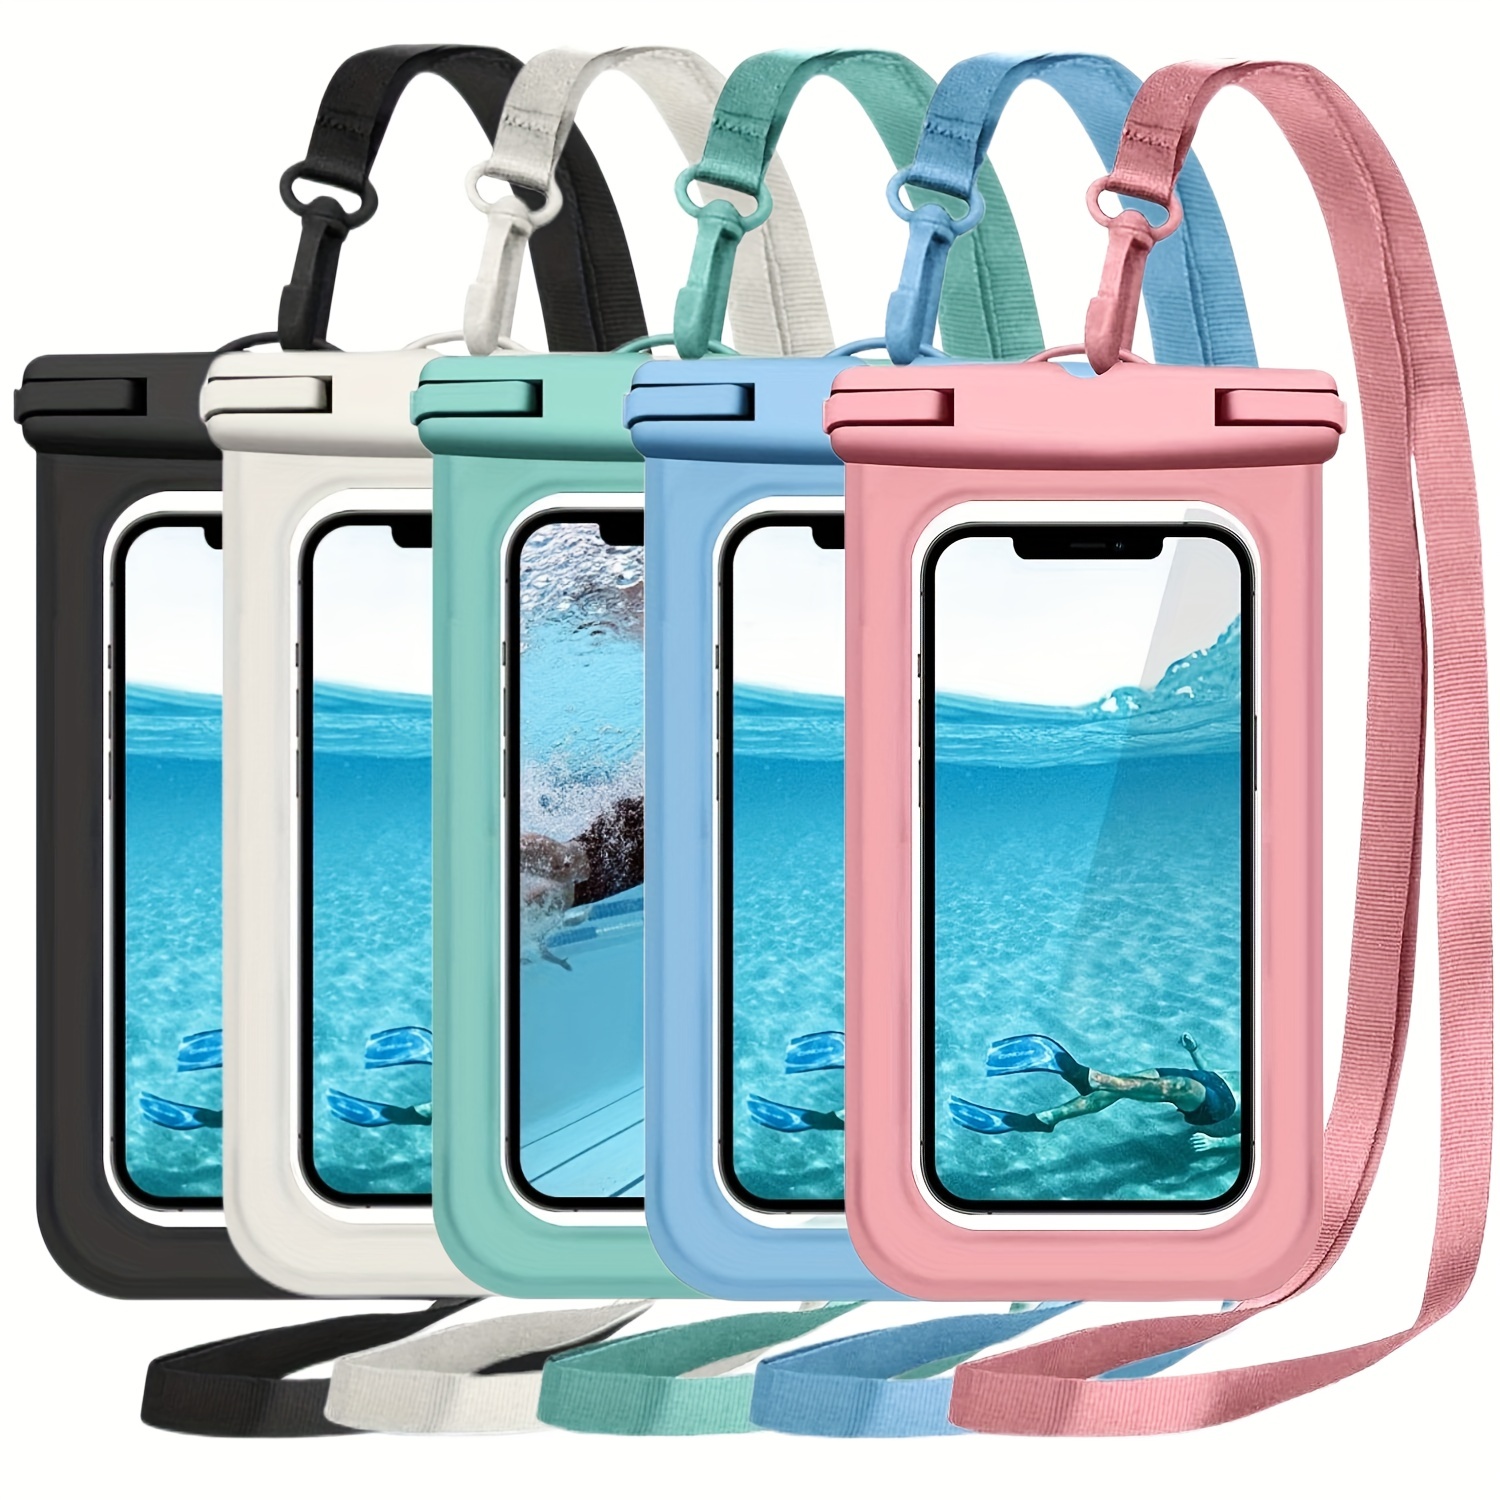 

2 Packs Of Extra-large Waterproof Pouches - Keep Your Smartphone Dry & Protected Underwater!